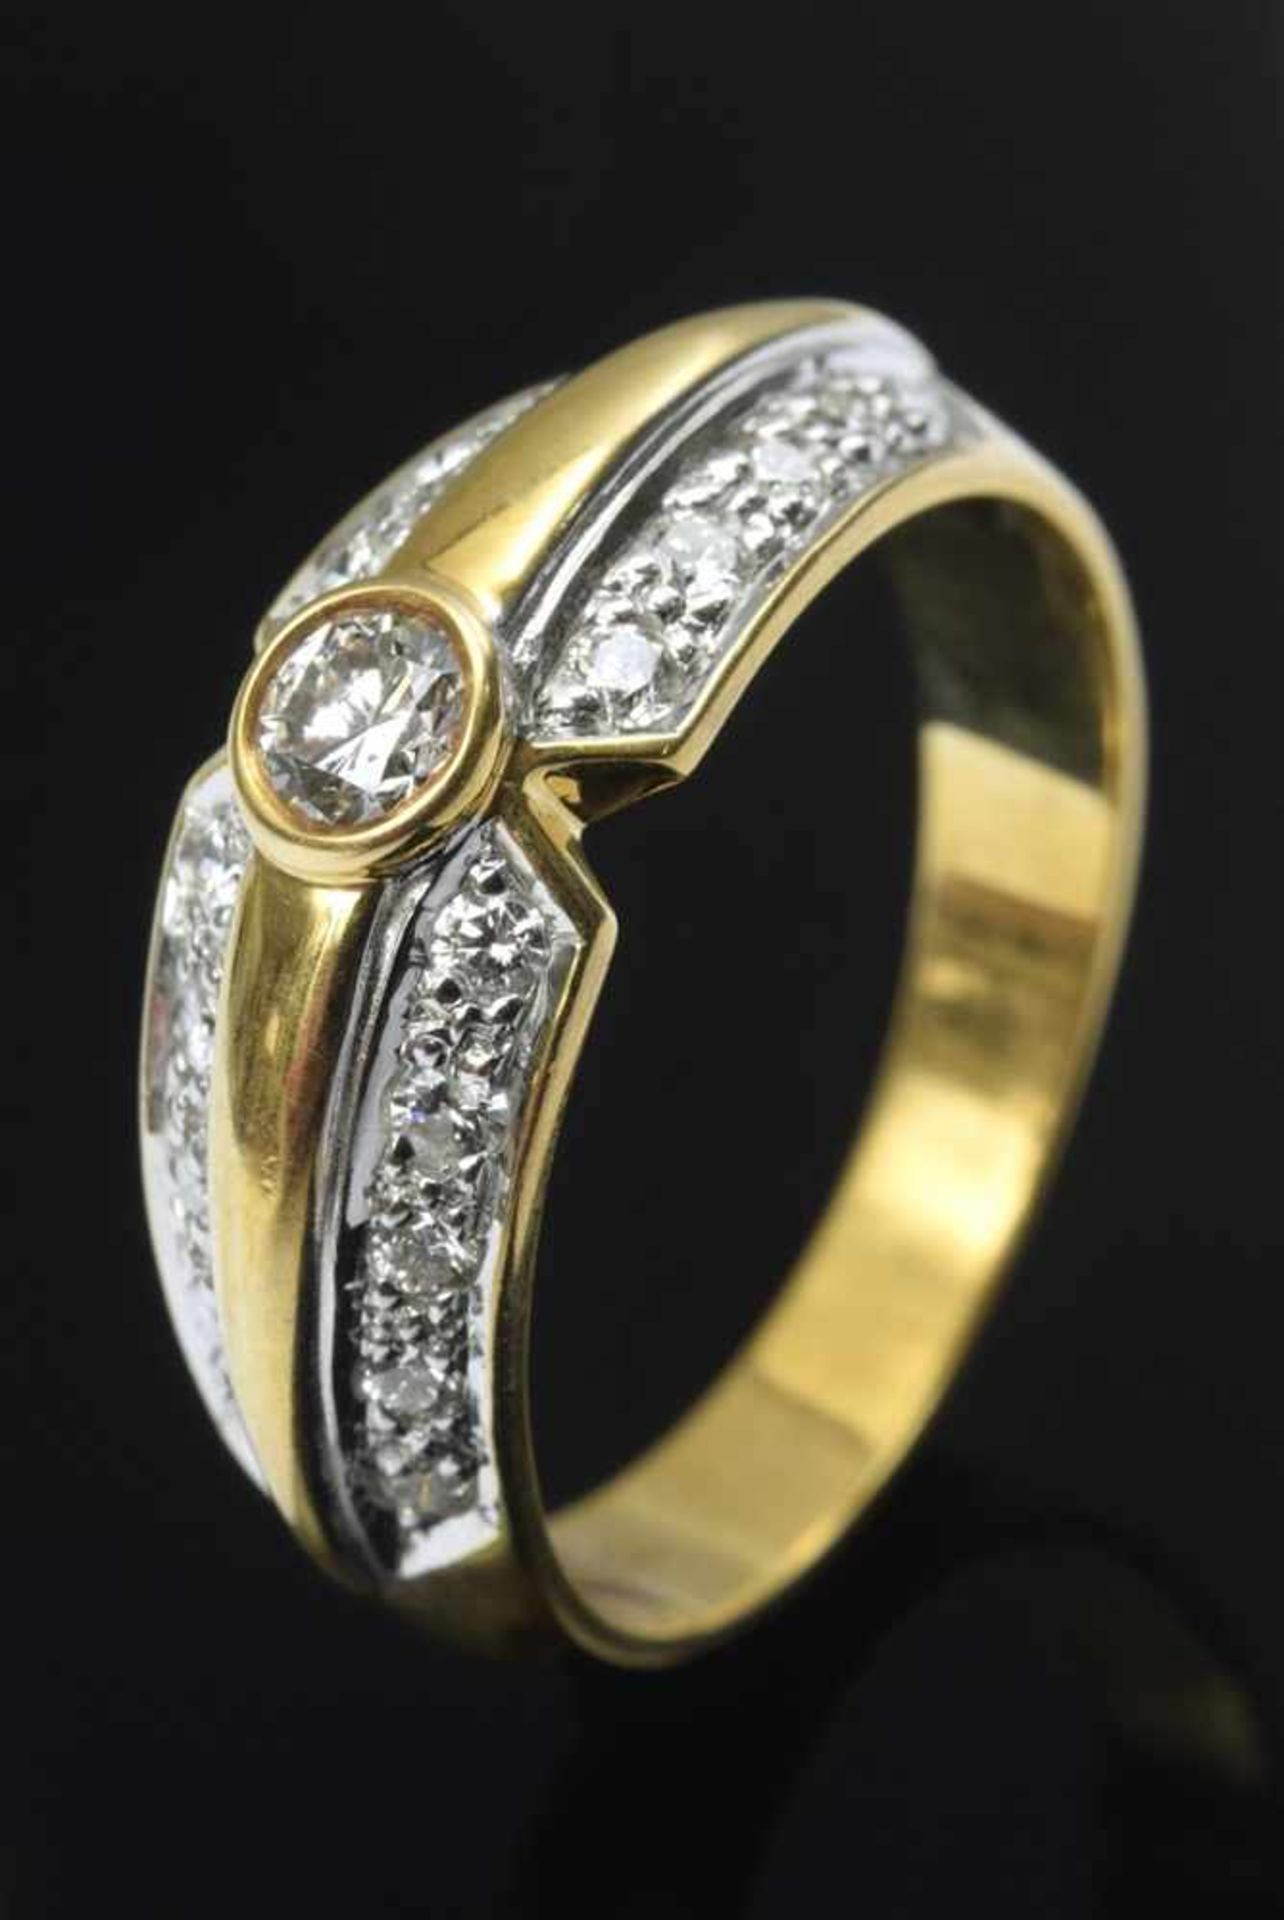 GG/WG 750 ring with diamonds (add. approx. 0.30ct/VS-SI/W), 4.2g, size 54 GG/WG 750 Ring mit